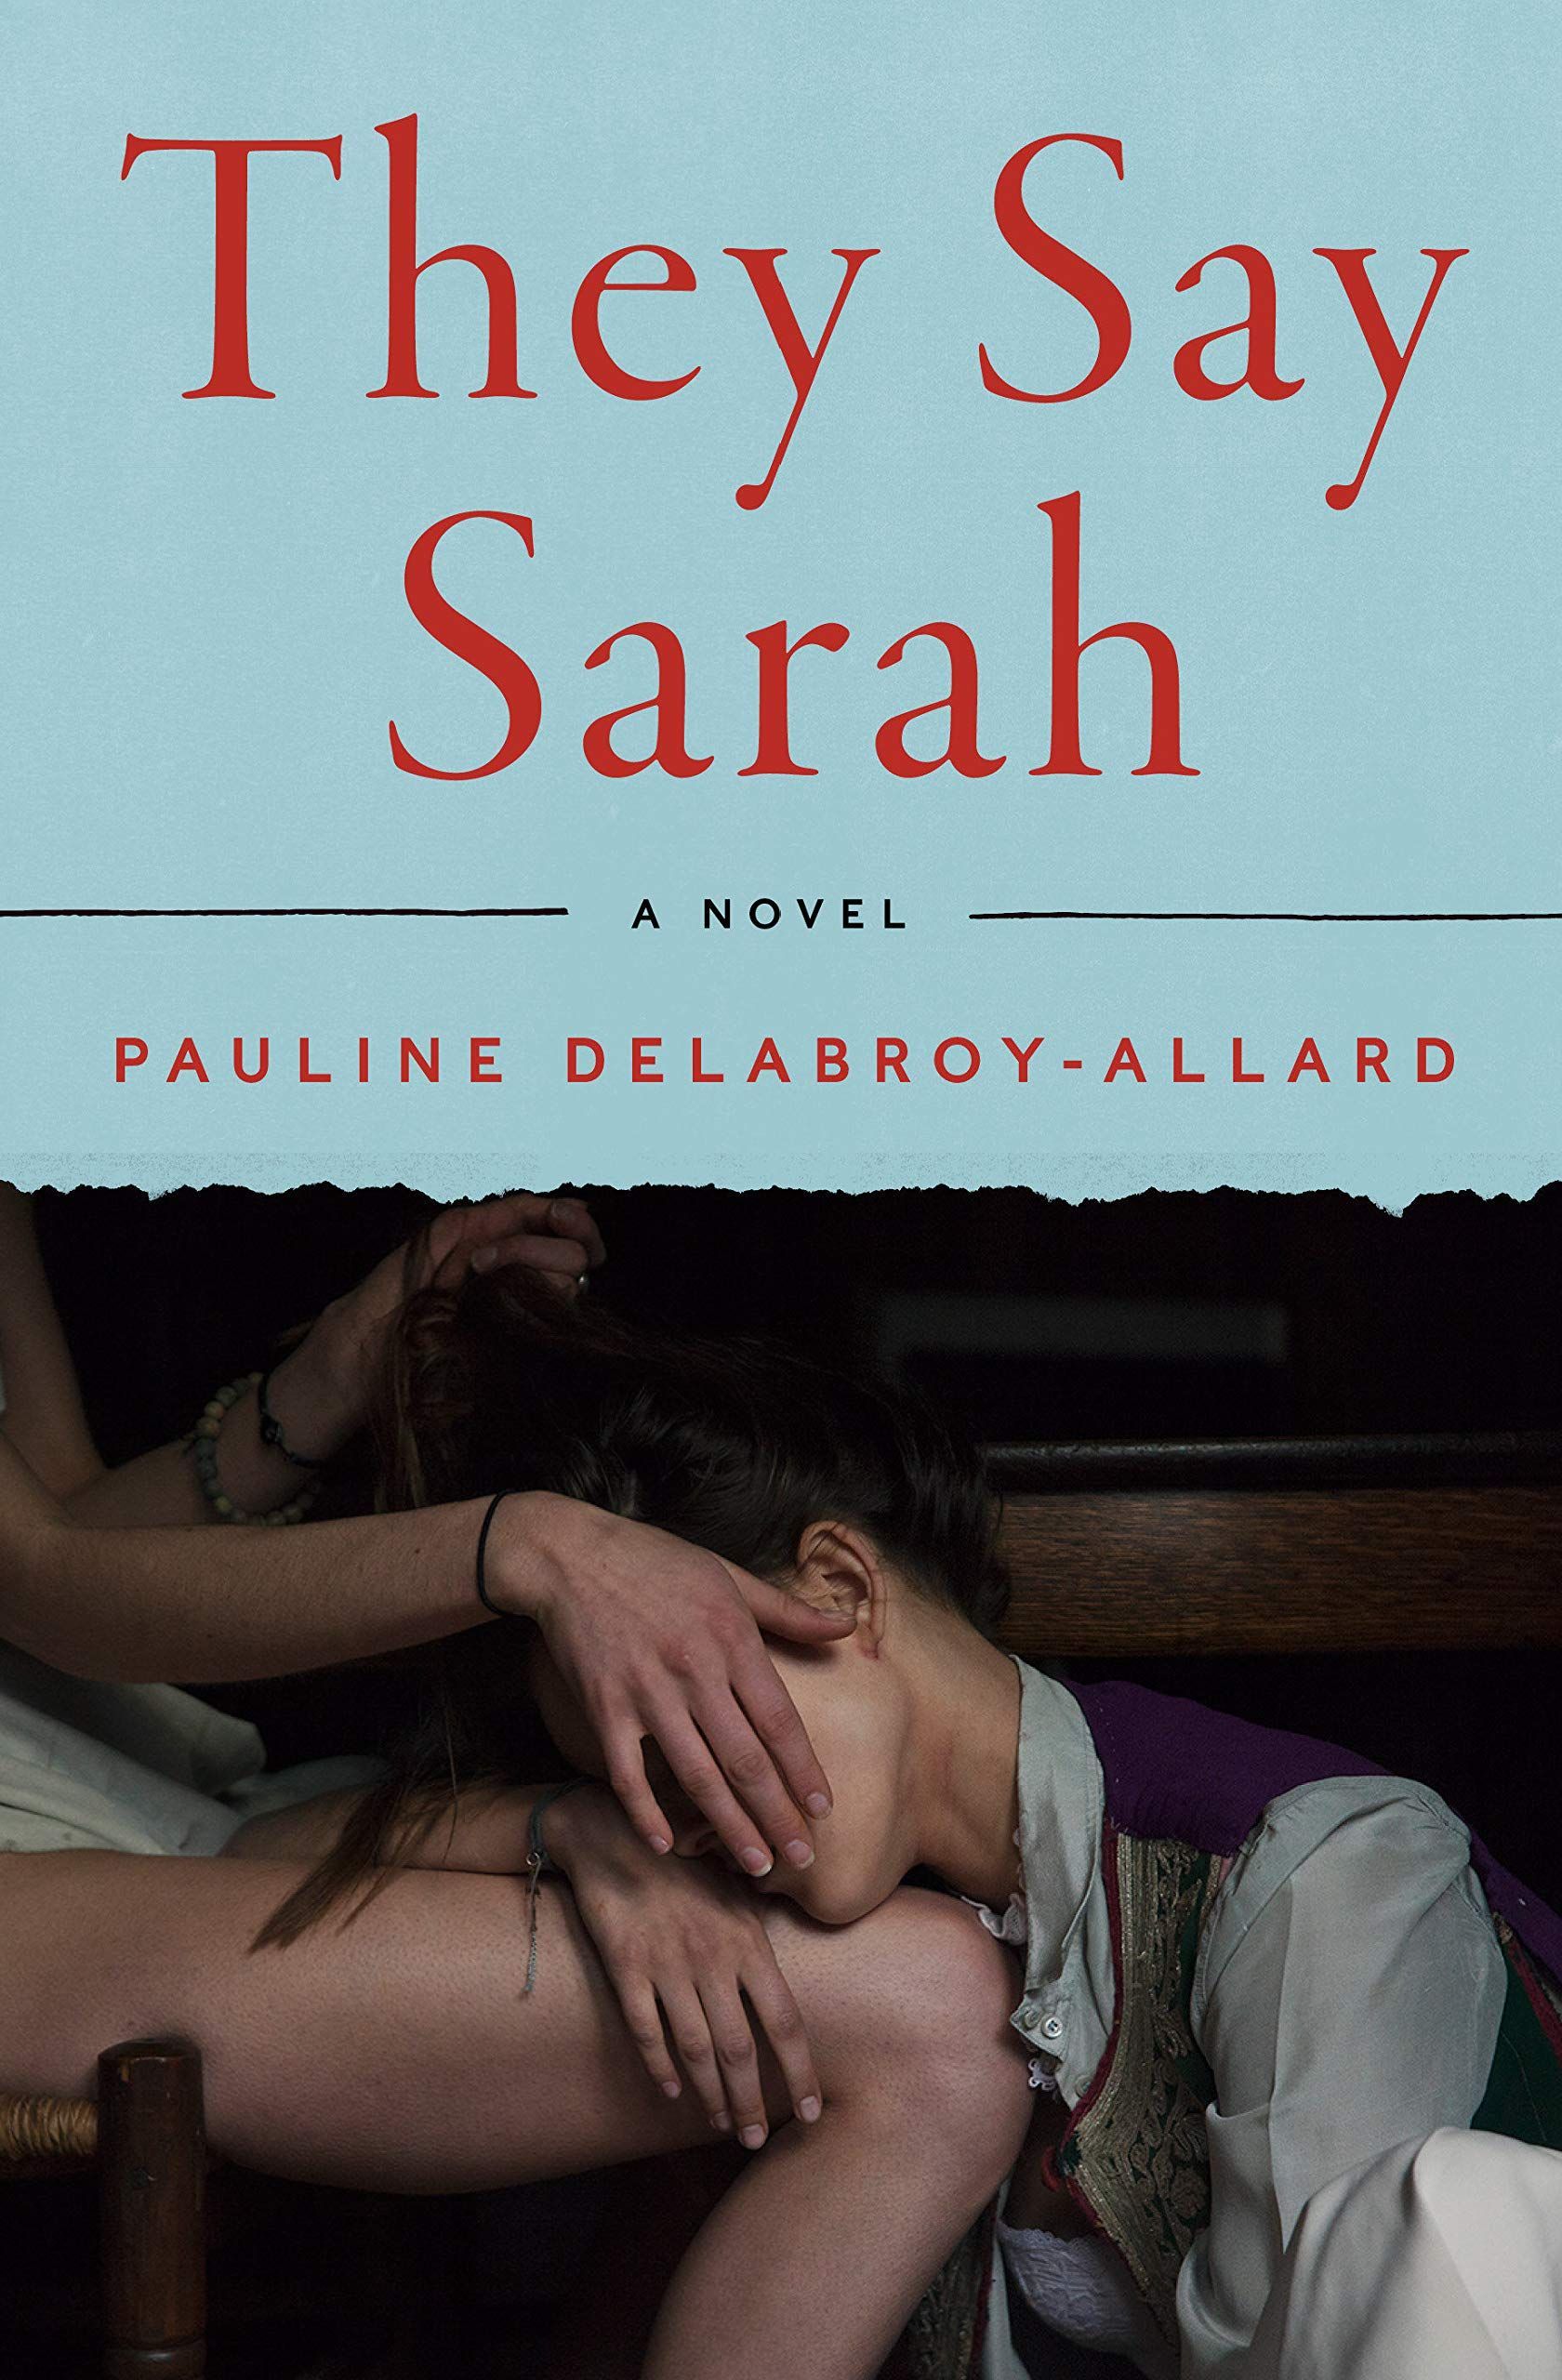 The Frenzy of Love: On Pauline Delabroy-Allard’s “They Say Sarah”